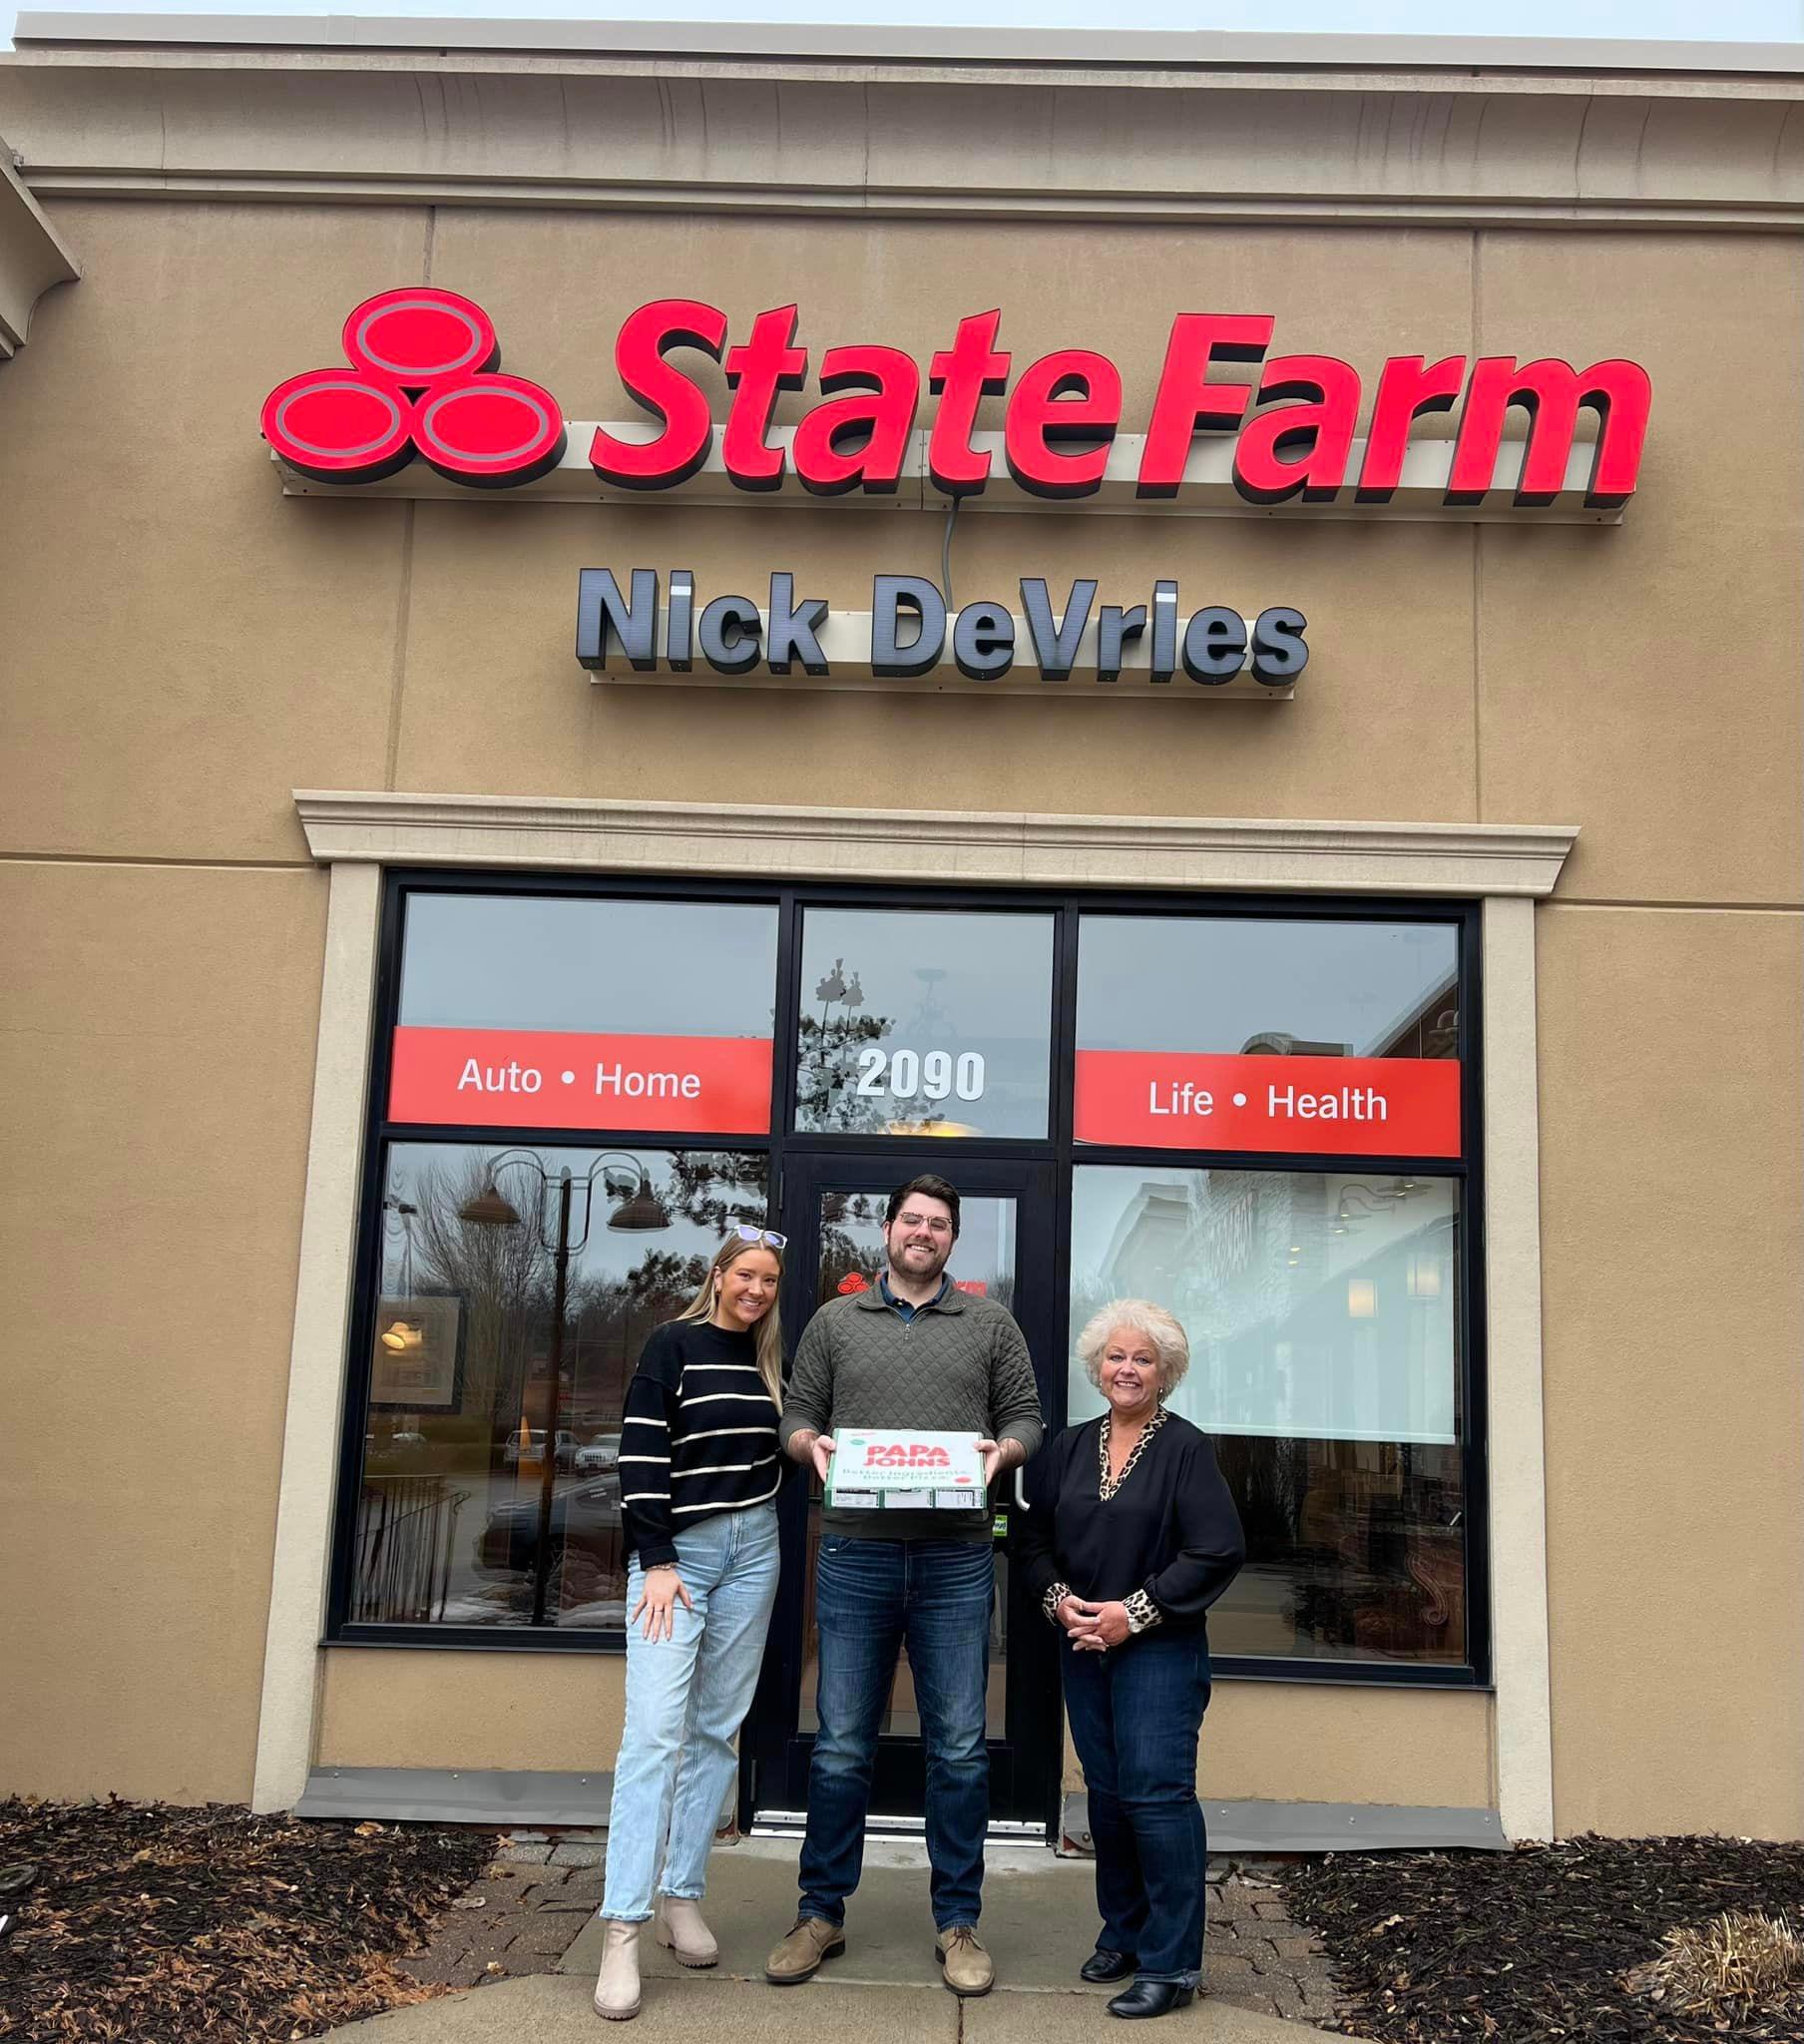 Happy Friday! Today we are celebrating “National Have Fun At Work Day” with a pizza party! 
Stop by  Nick DeVries - State Farm Insurance Agent Eagan (651)454-2374